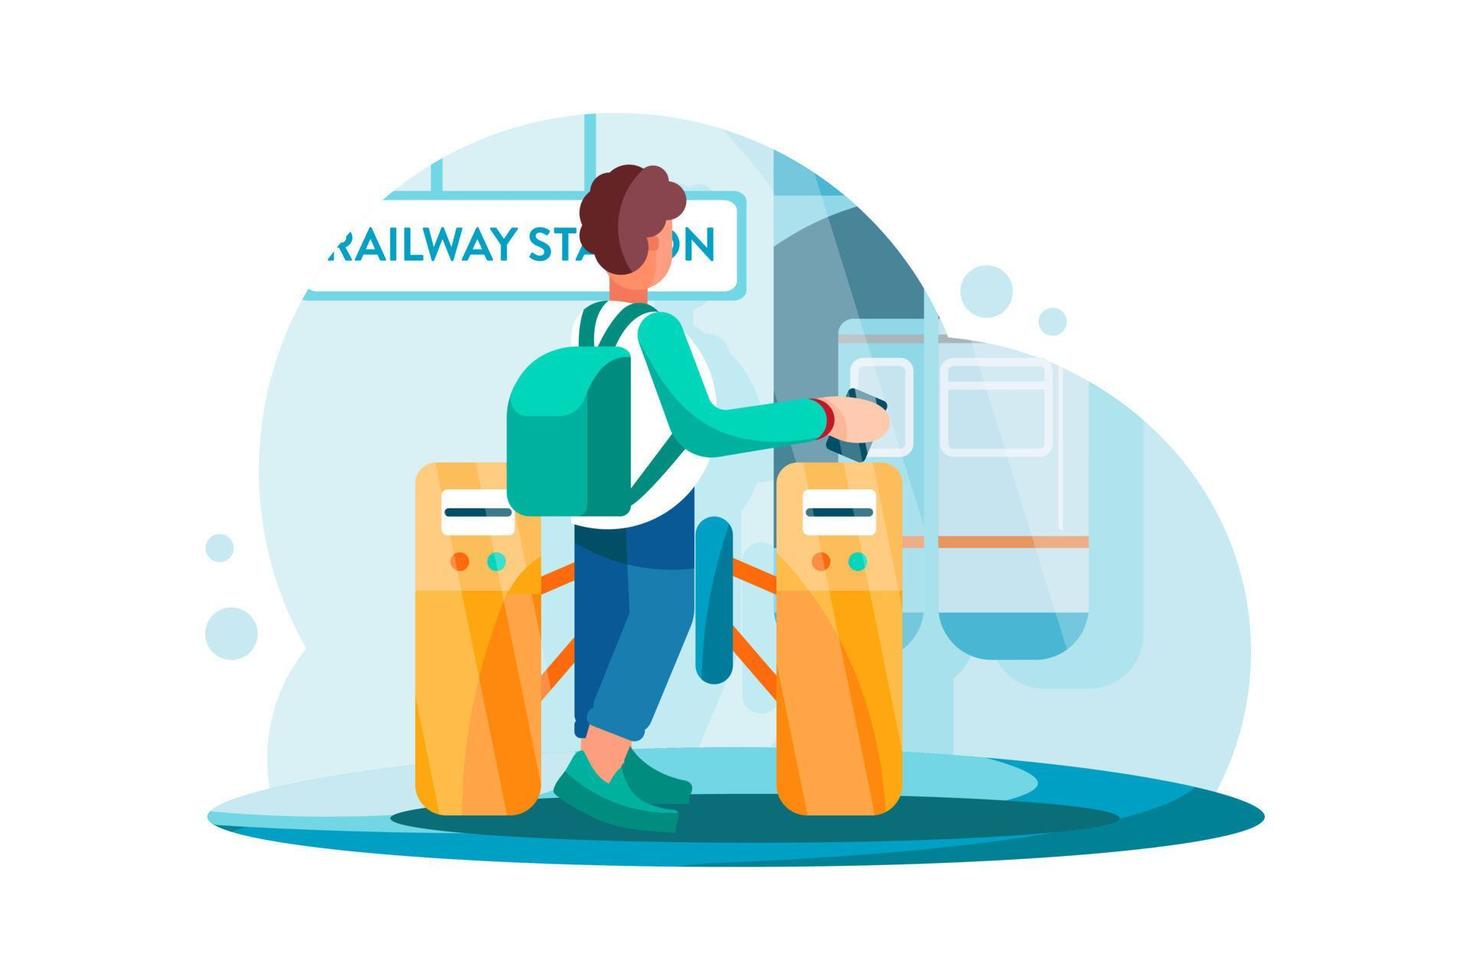 Payment system with Railway station on background vector